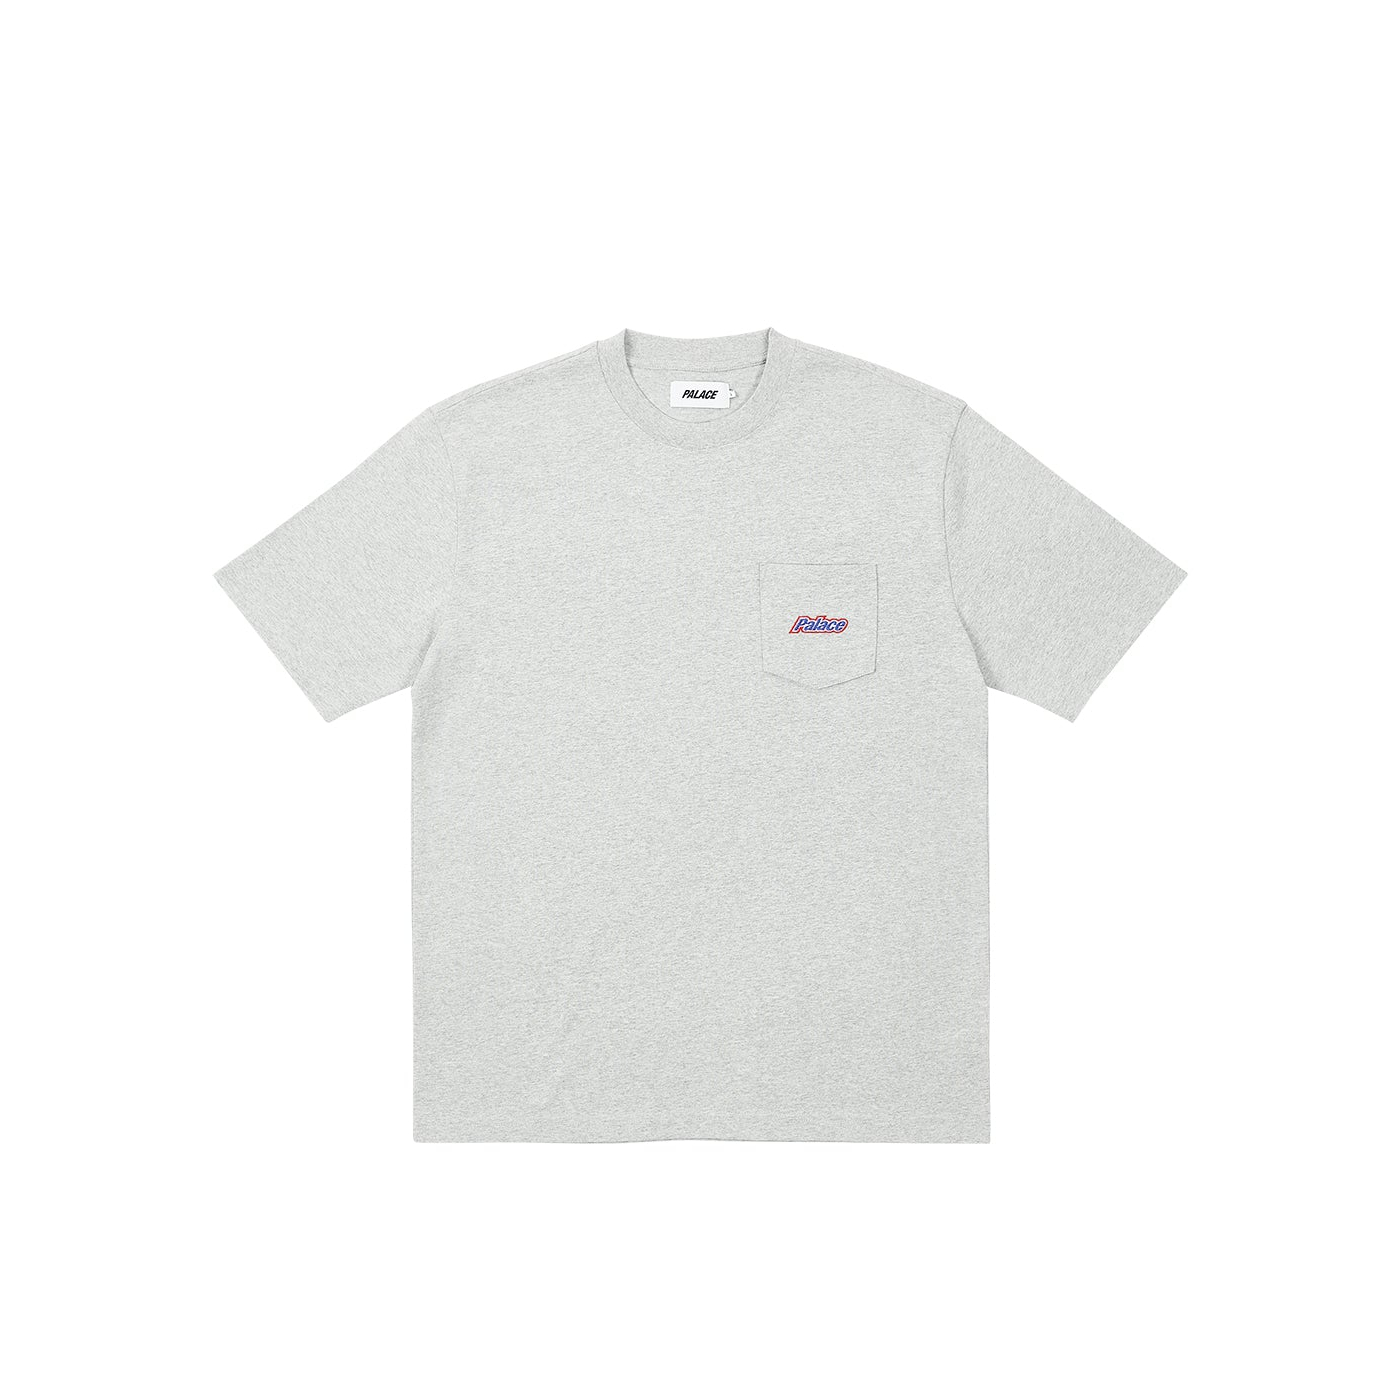 Thumbnail EMBROIDERED POCKET T-SHIRT GREY MARL one color